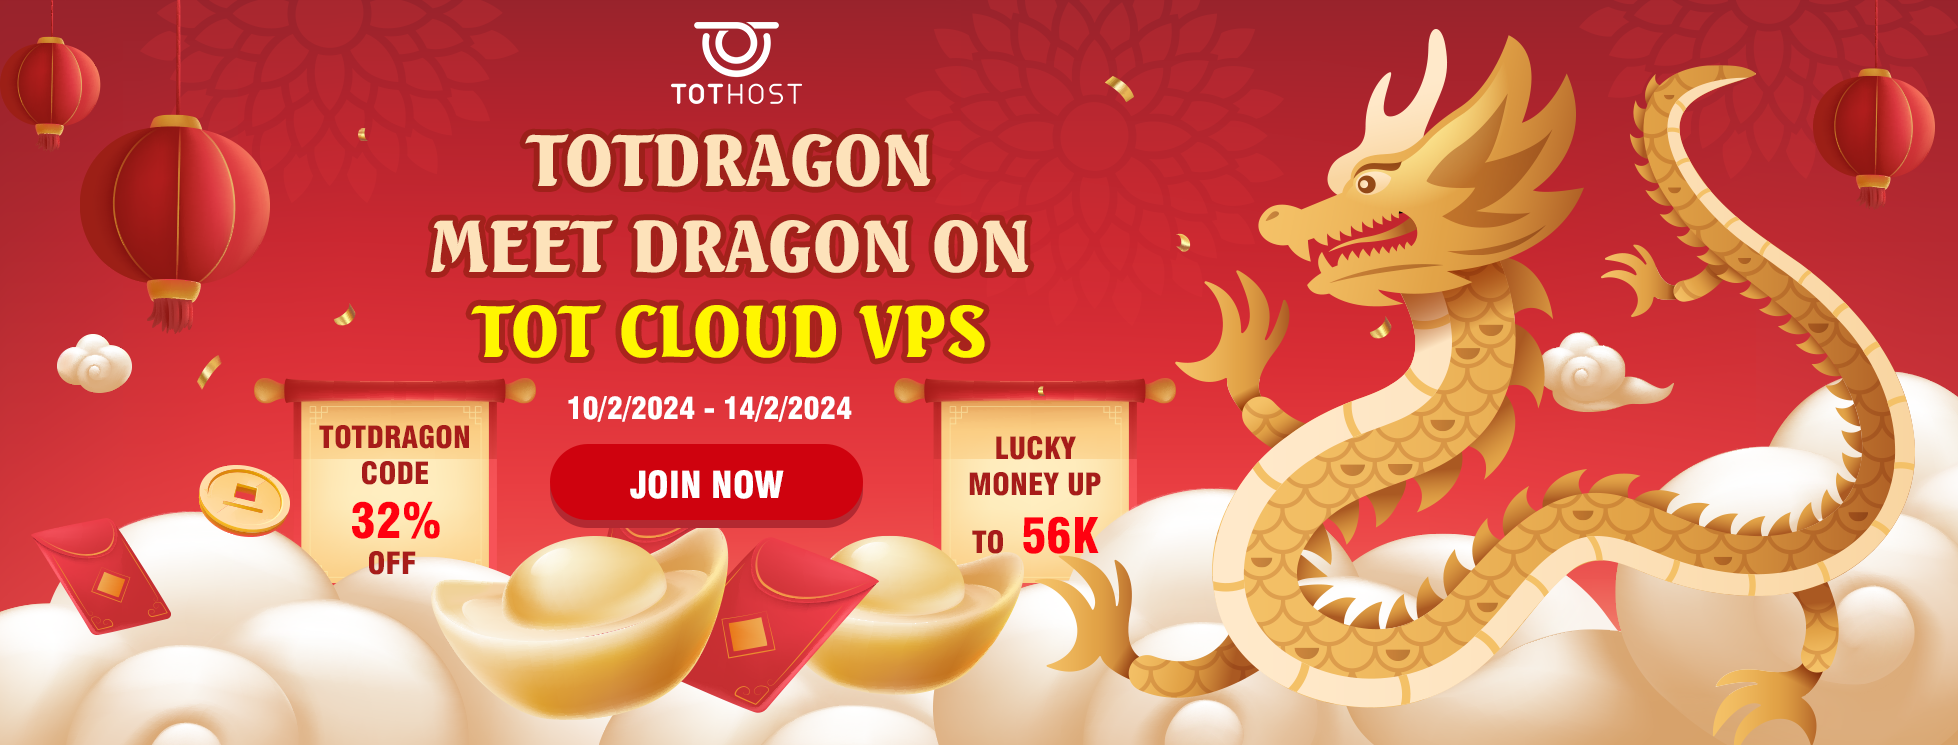 TOTDRAGON: Lucky Money & Chance to receive free VPS